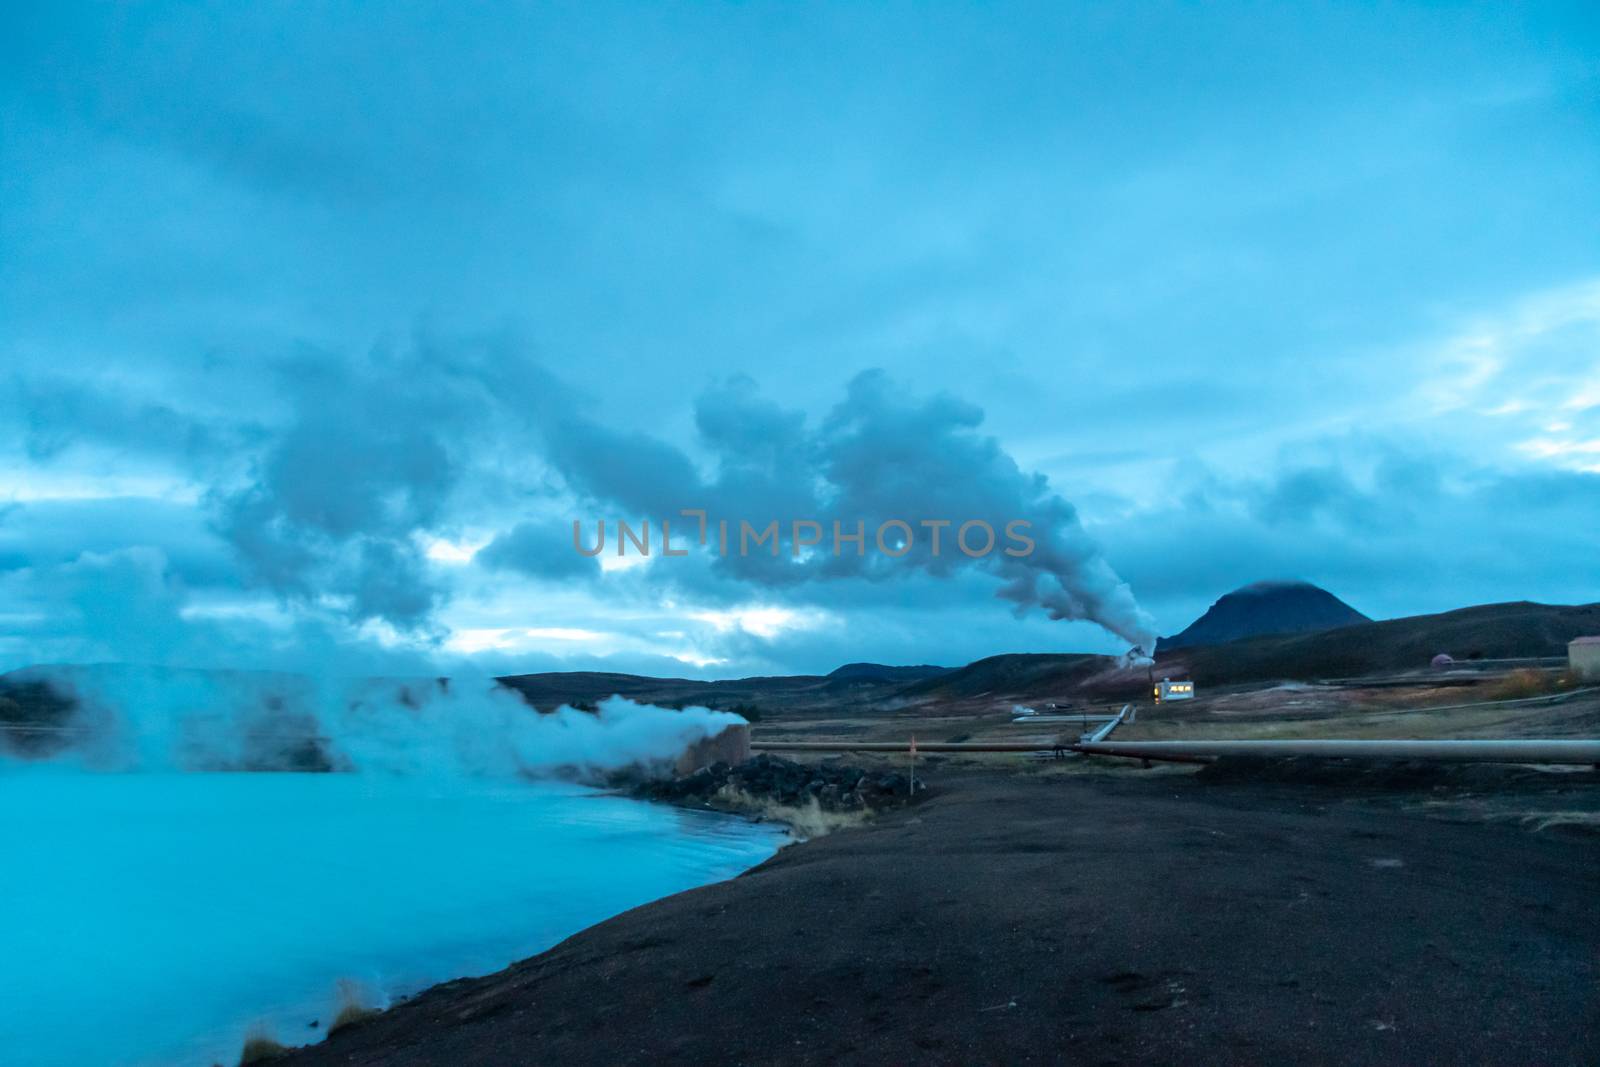 Blue Lake in Iceland geothermal hot spring turquoise water steam pipelines